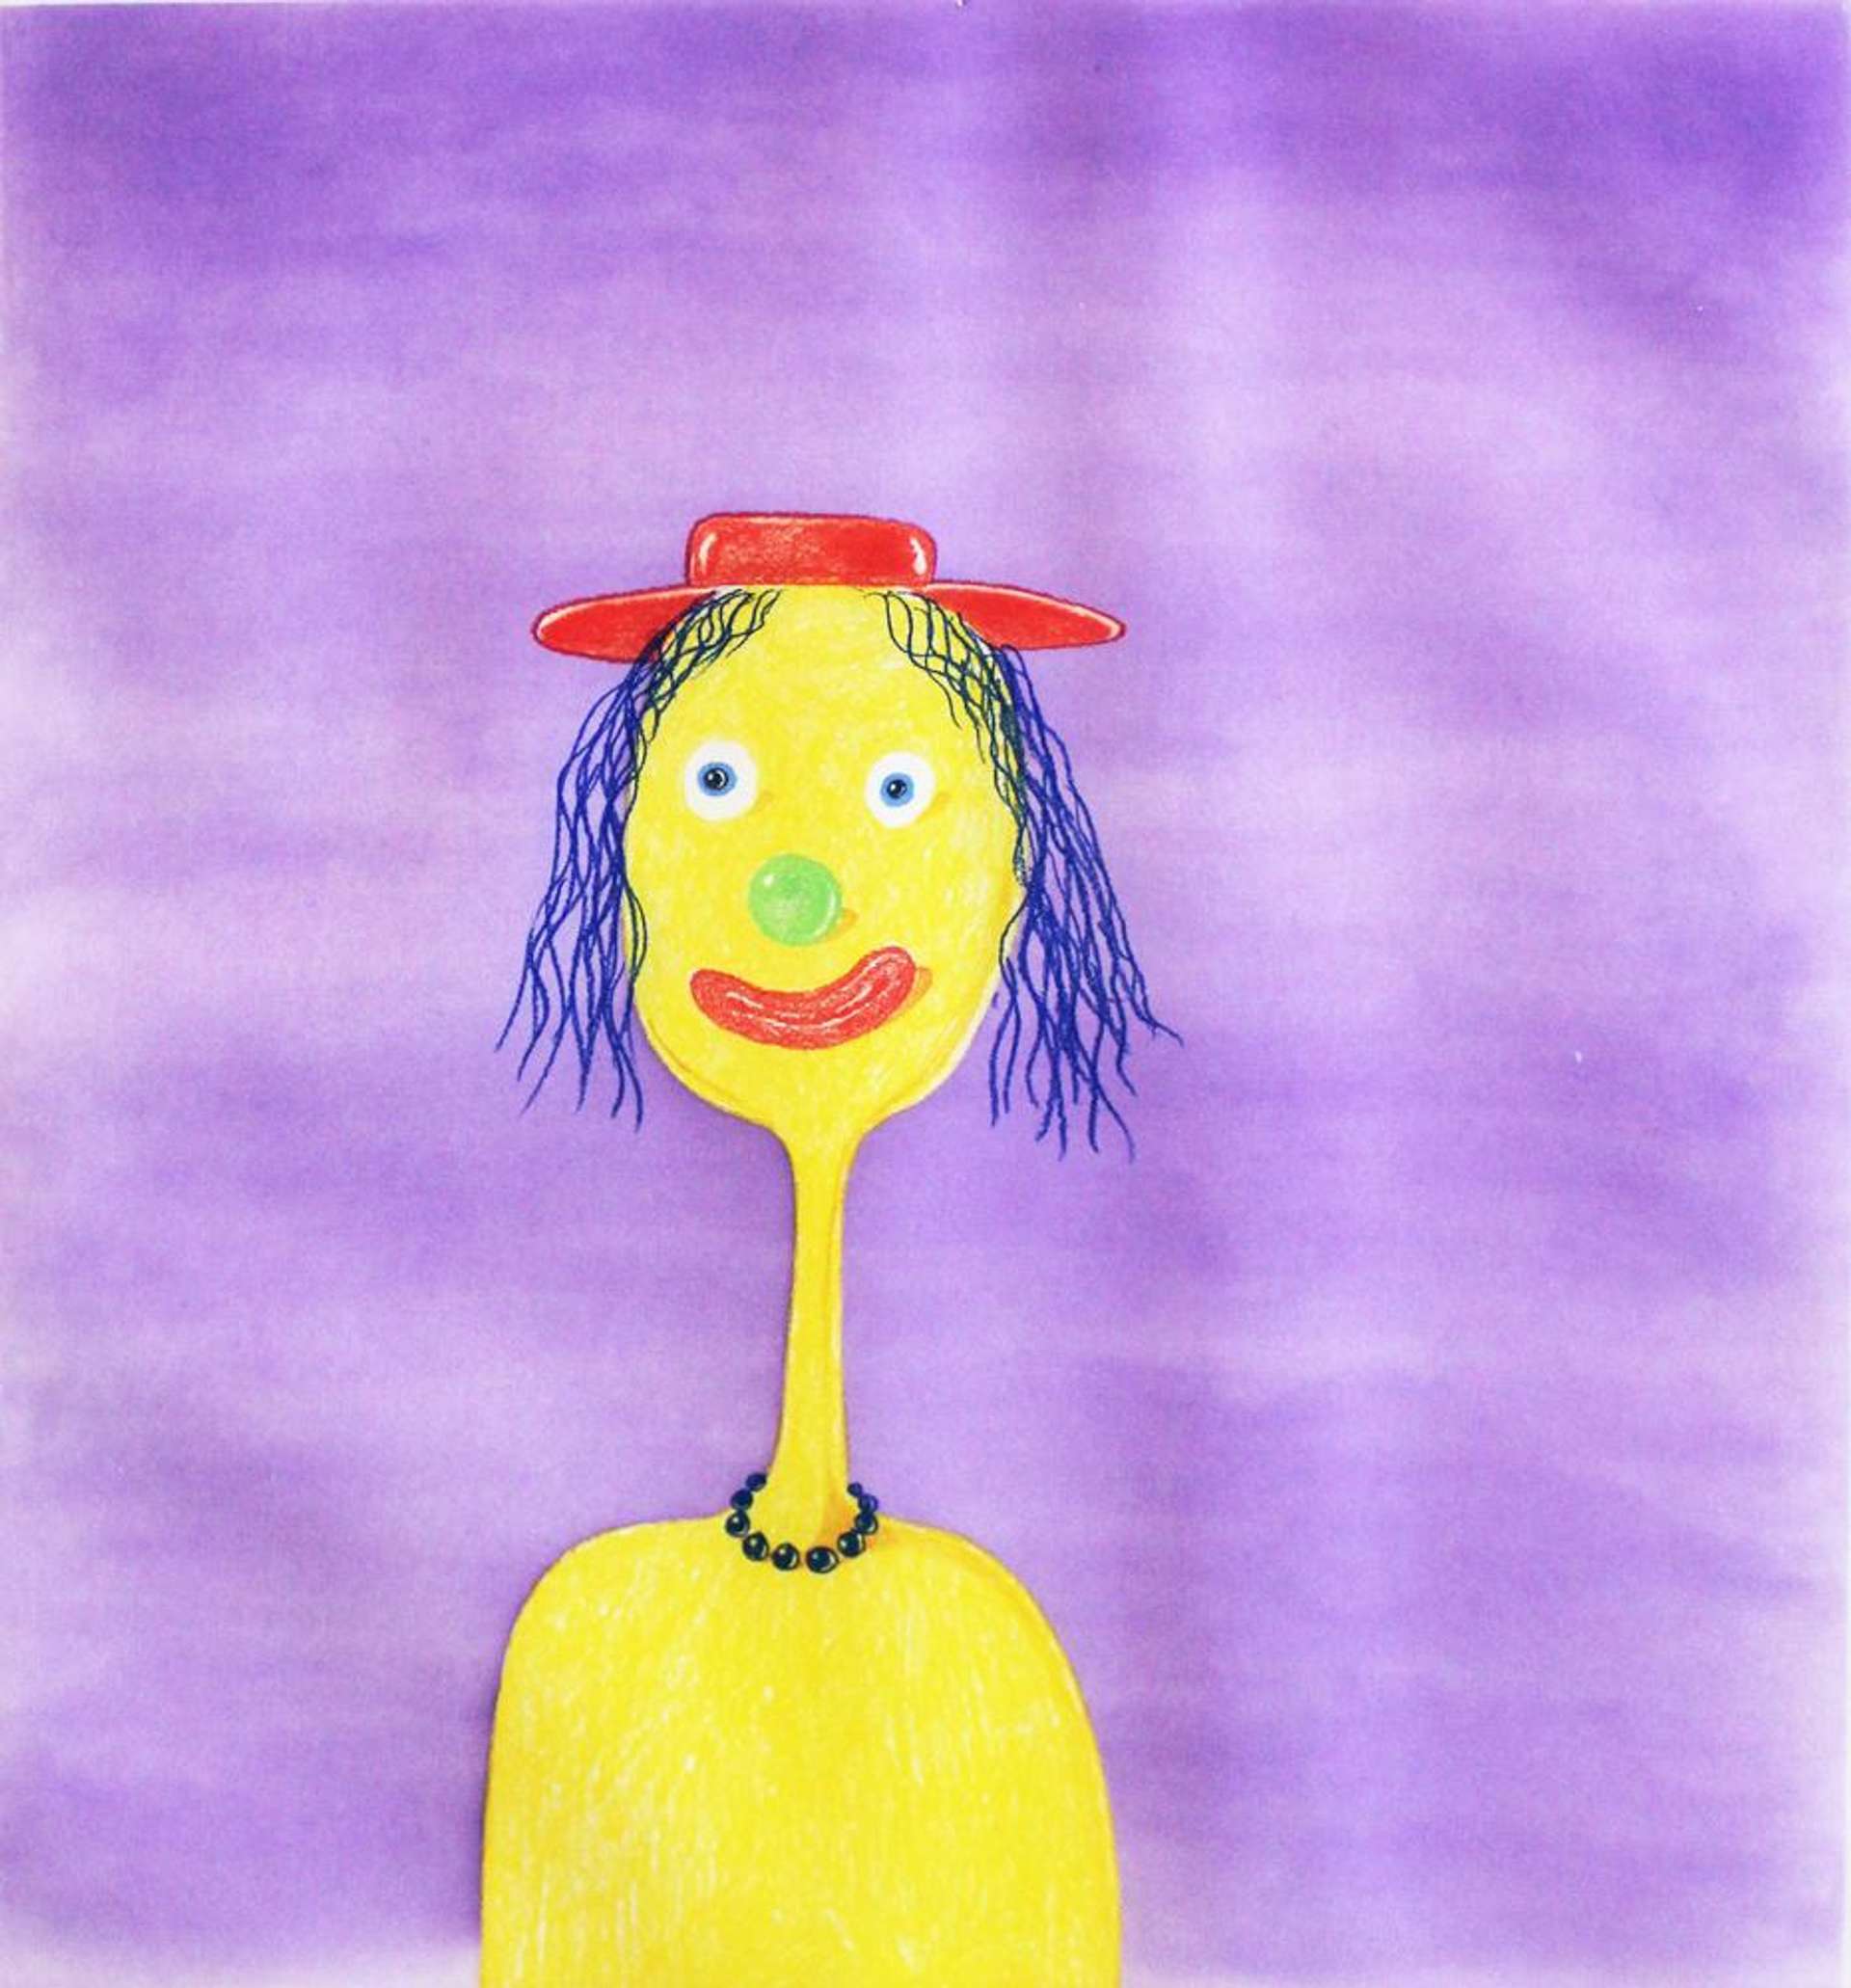 George Condo’s Clown. An etching of a yellow clown with a green nose and red hat against a purple background.